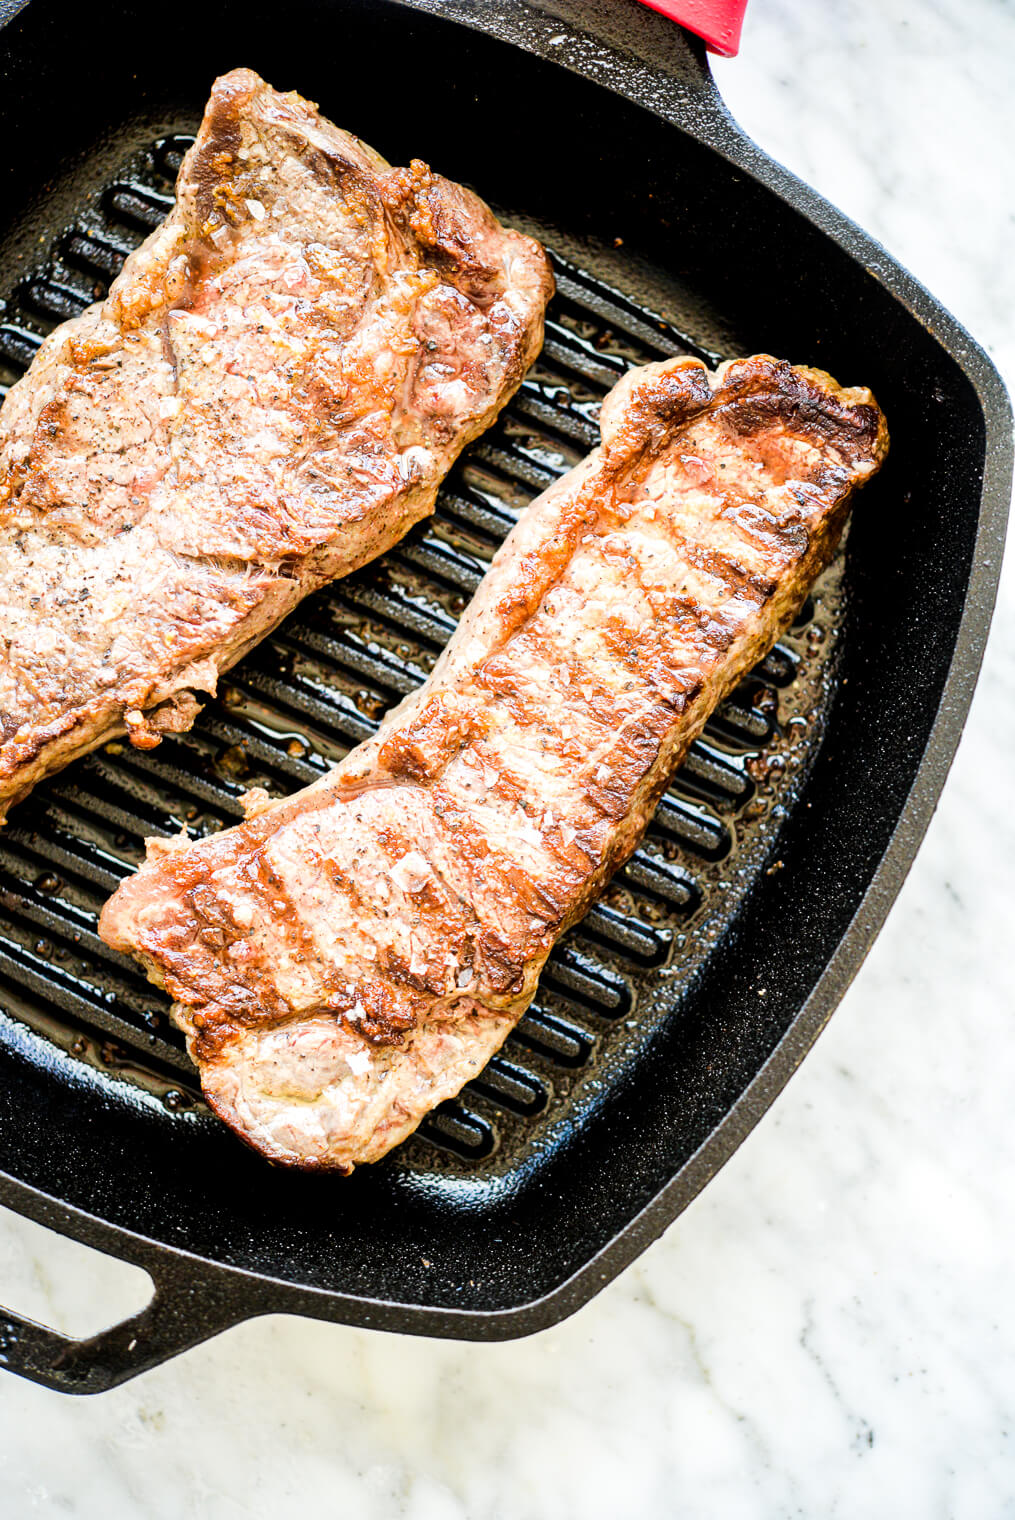 How to Grill a Steak with Charcoal
